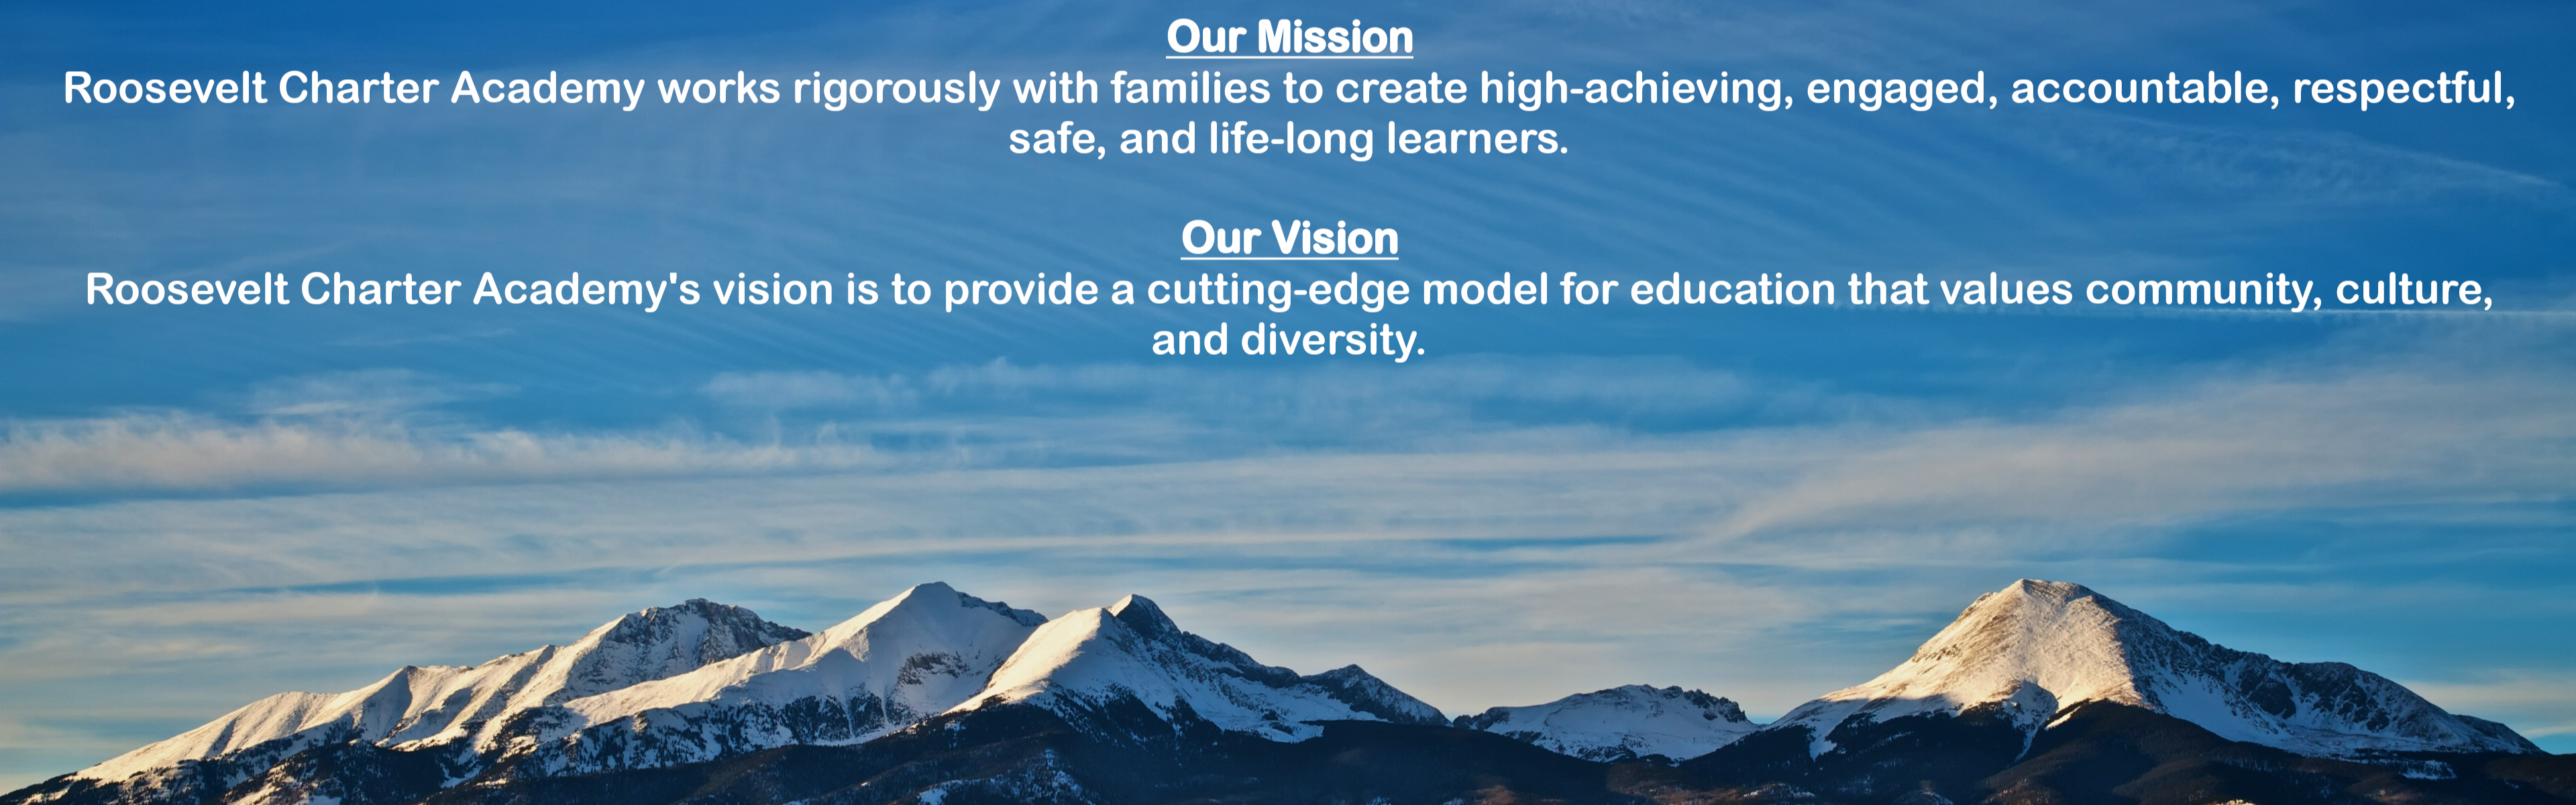 Mission: Roosevelt works rigorously with families to create high achieving, engaged, accountable, respectful, and safe, life-long learners.   Vision: Providing a cutting-edge model for education that values community, culture, and diversity.